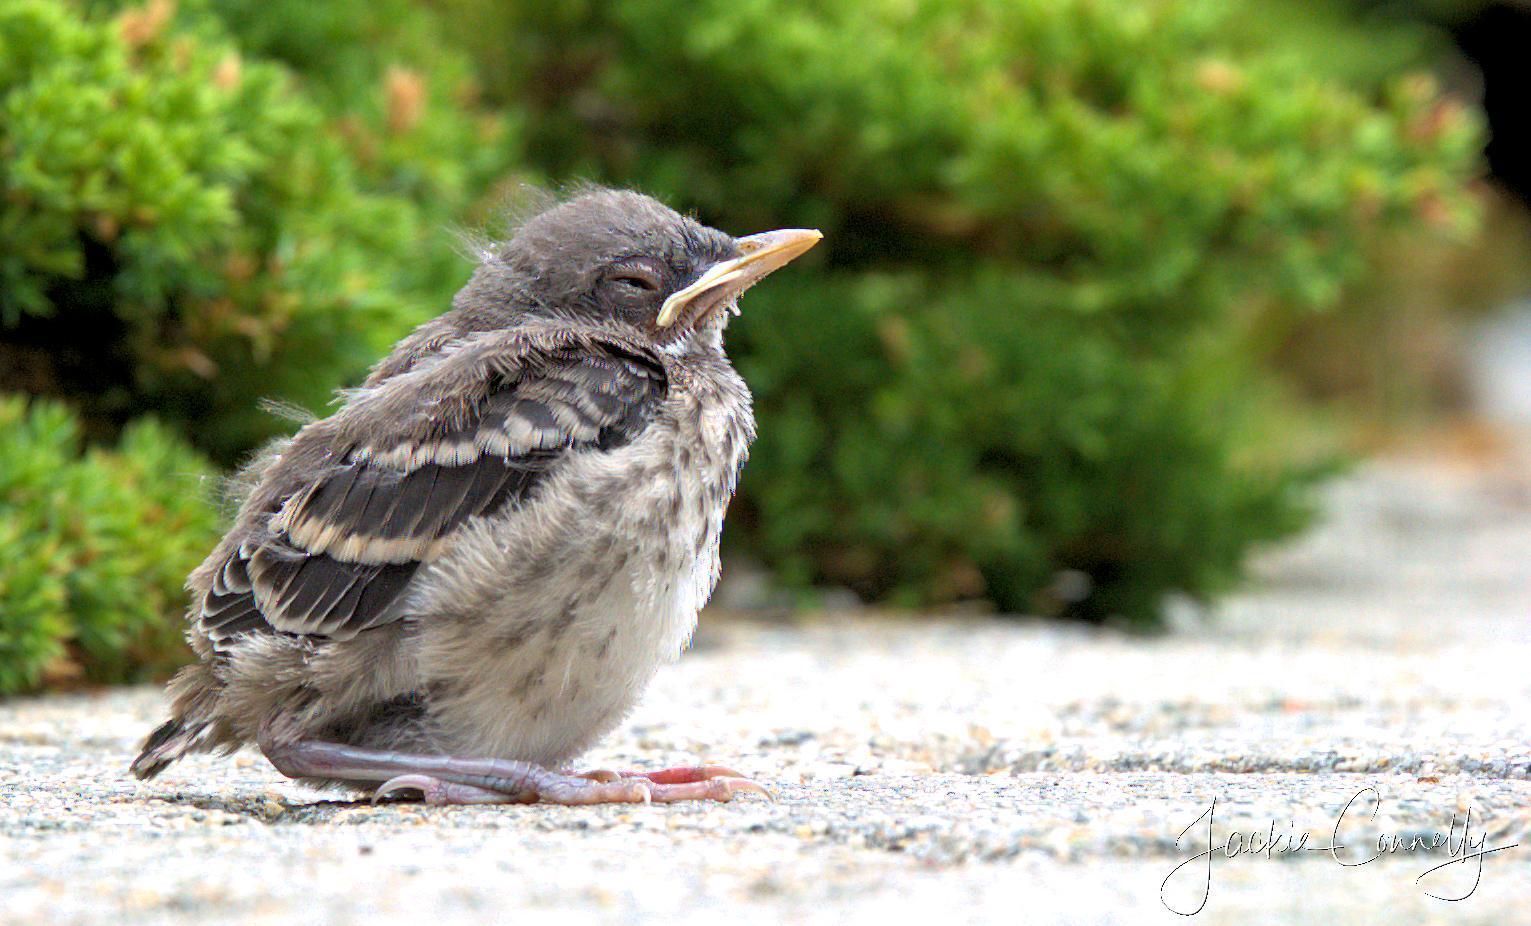 Northern Mockingbird Photo by Jackie Connelly-Fornuff